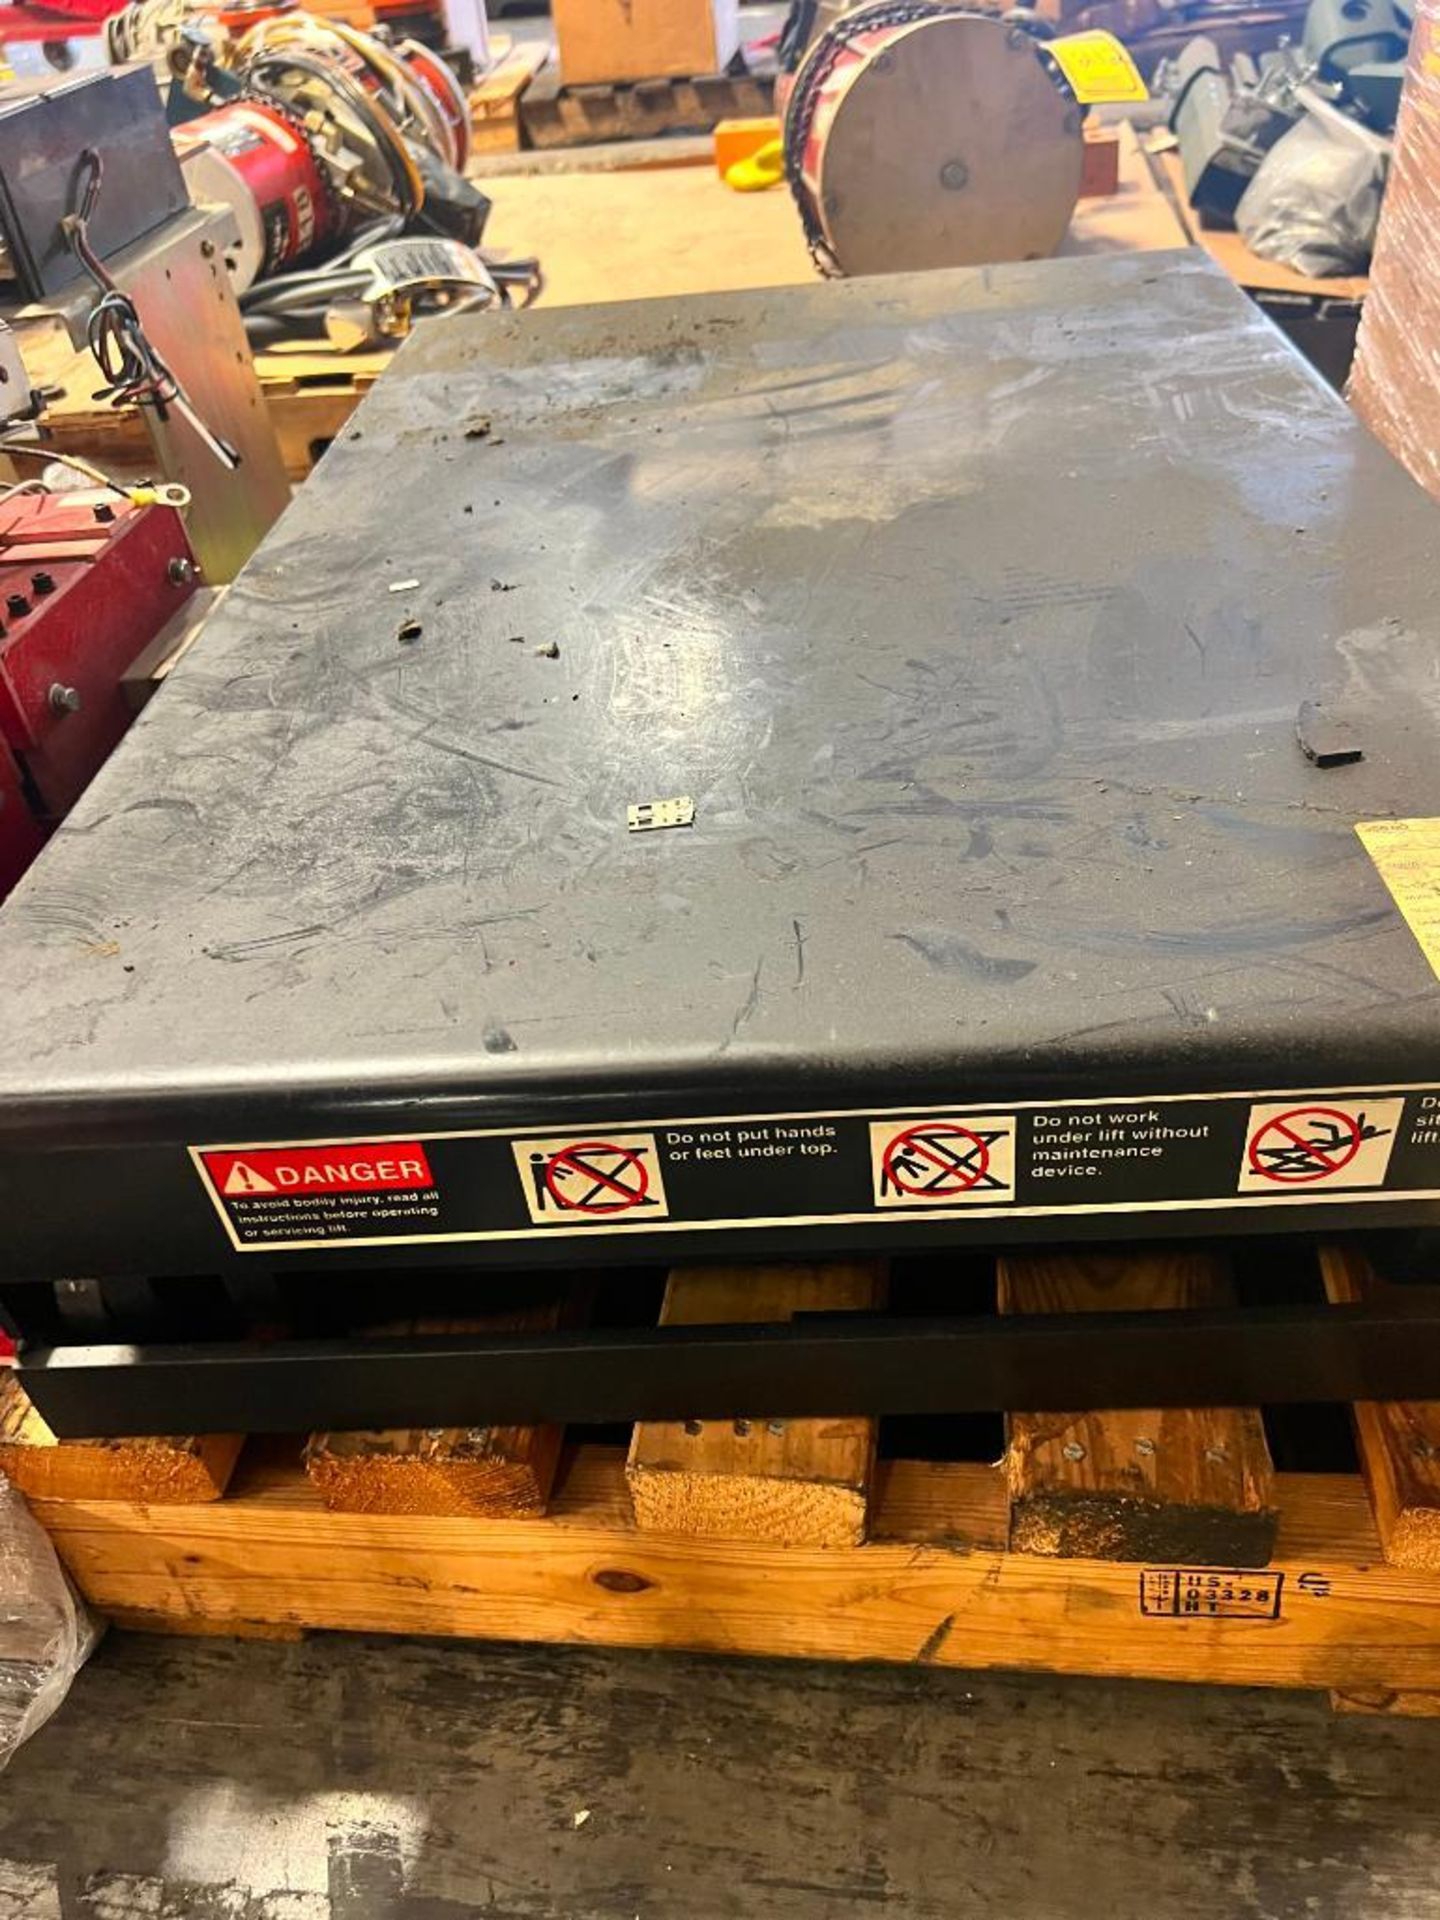 Autoquip Series 35 Electric Lift Table, Model 24S40, S/N 512115082, Max. Load: 4,000 LB. - Image 3 of 3